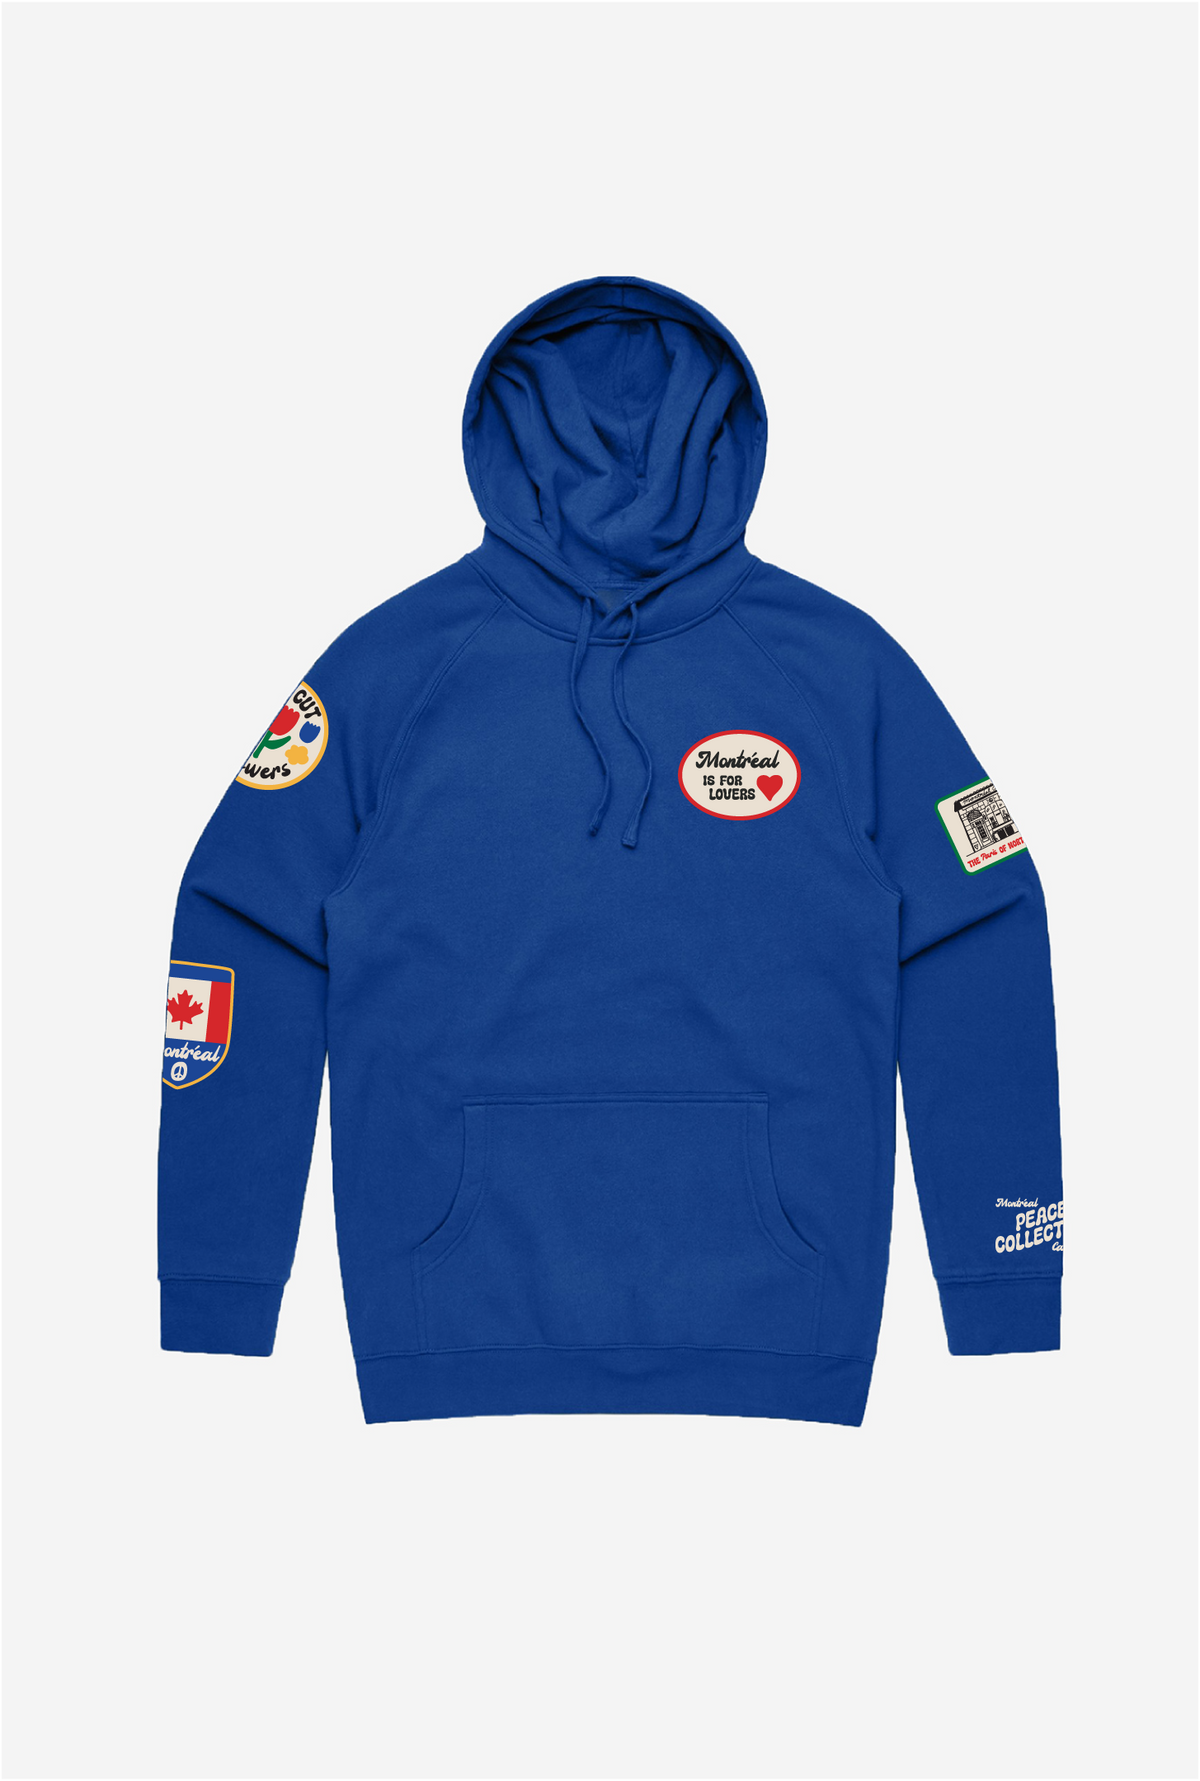 Montreal is for Lovers Patch Hoodie - Royal